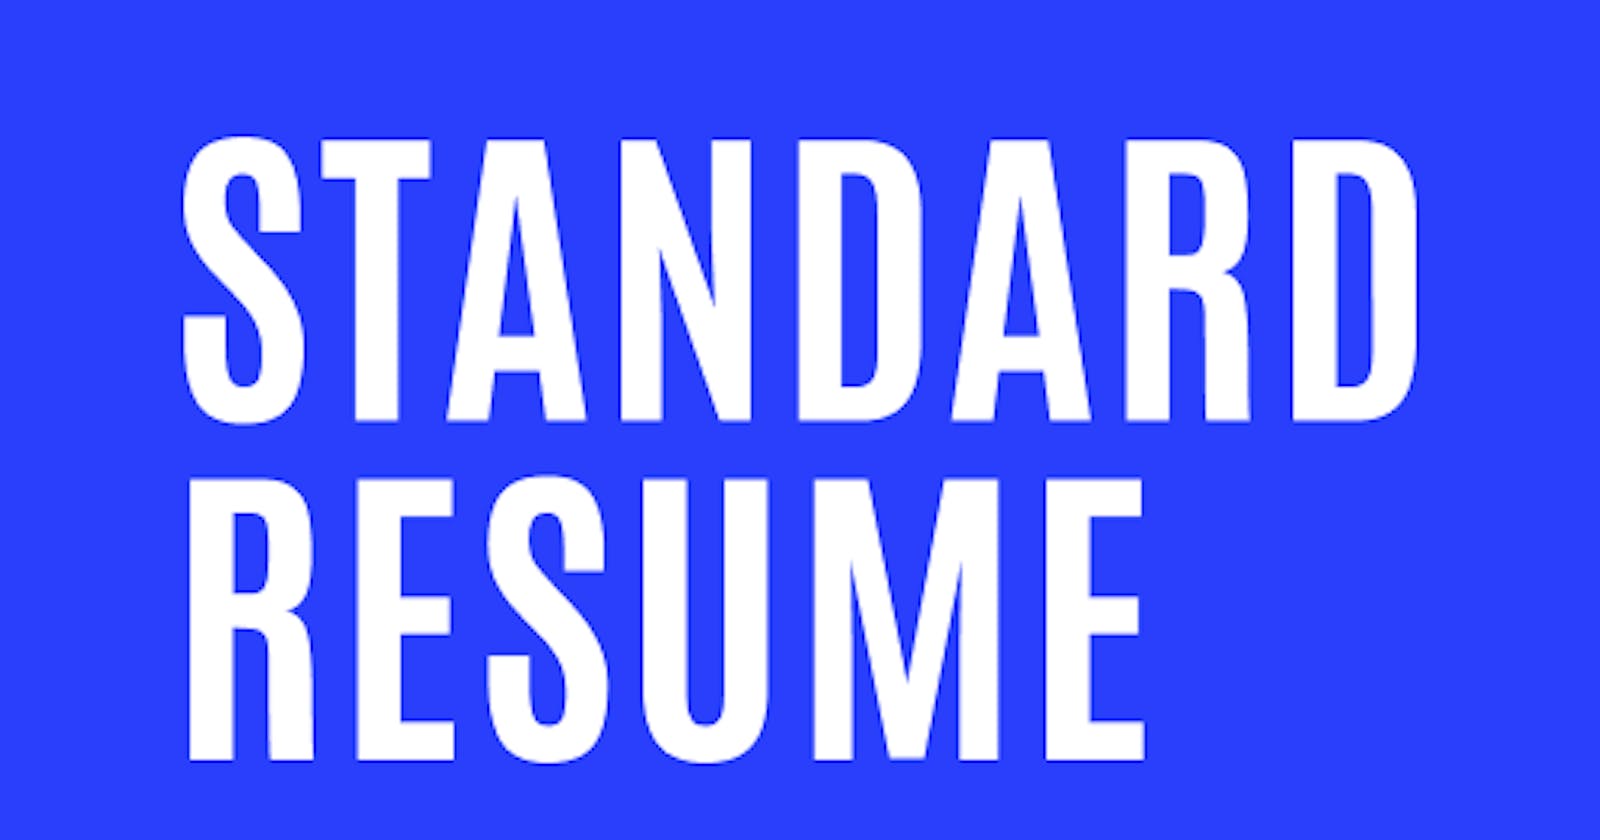 Elevate Your Job Hunt with Standard Resume